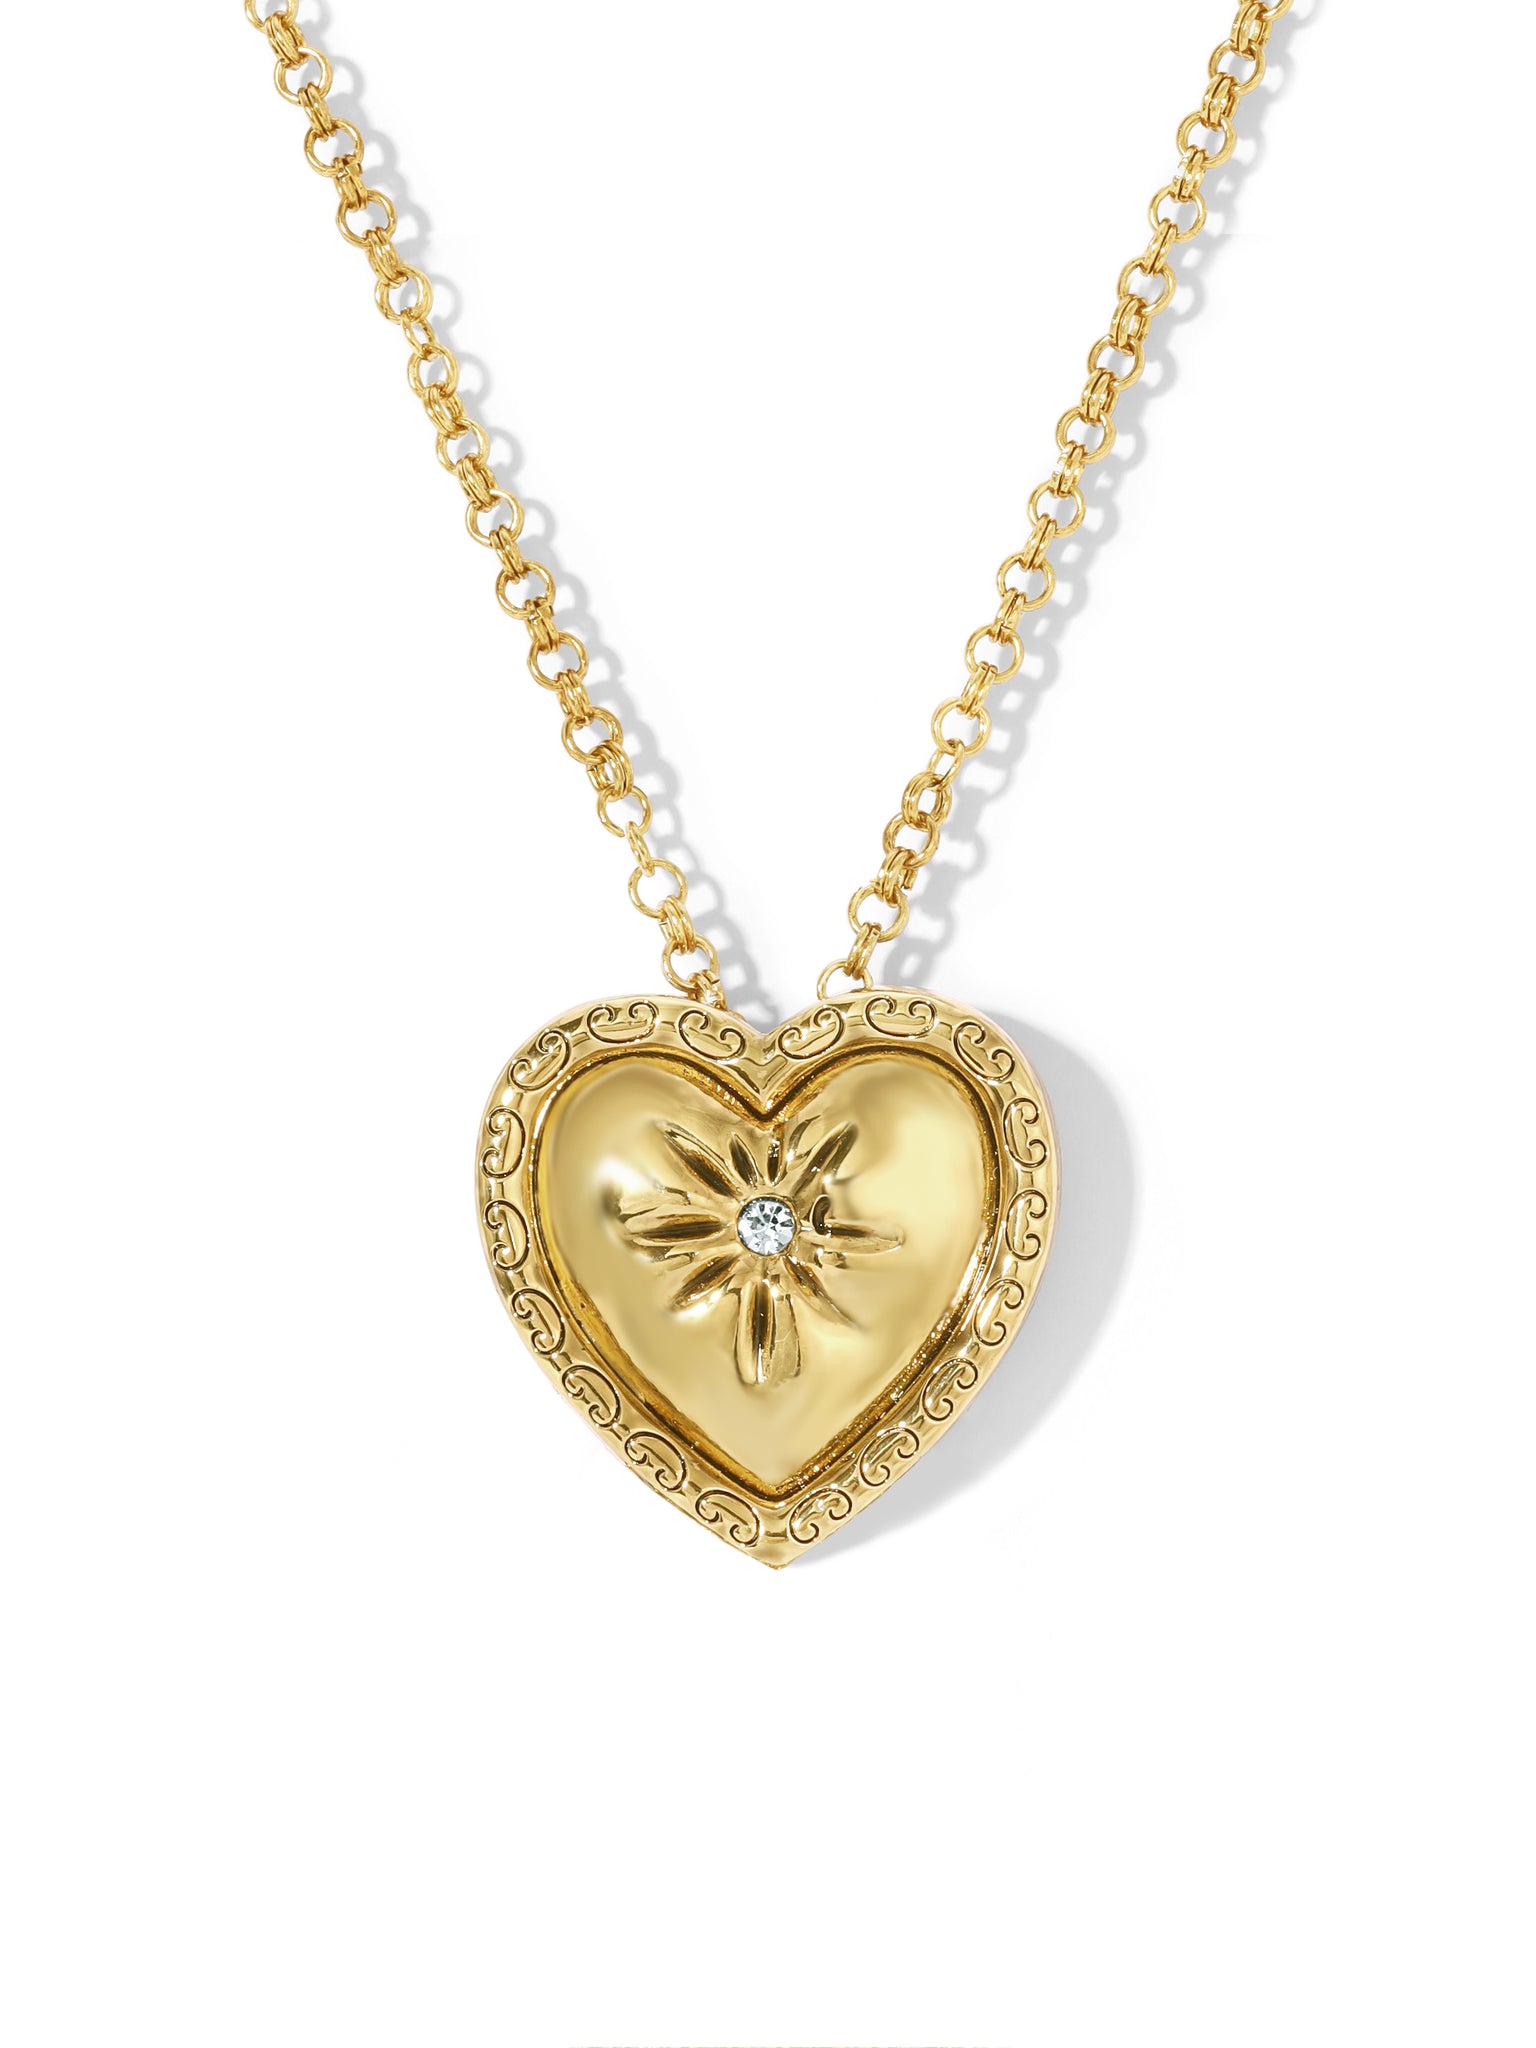 The Daphne Heart Necklace